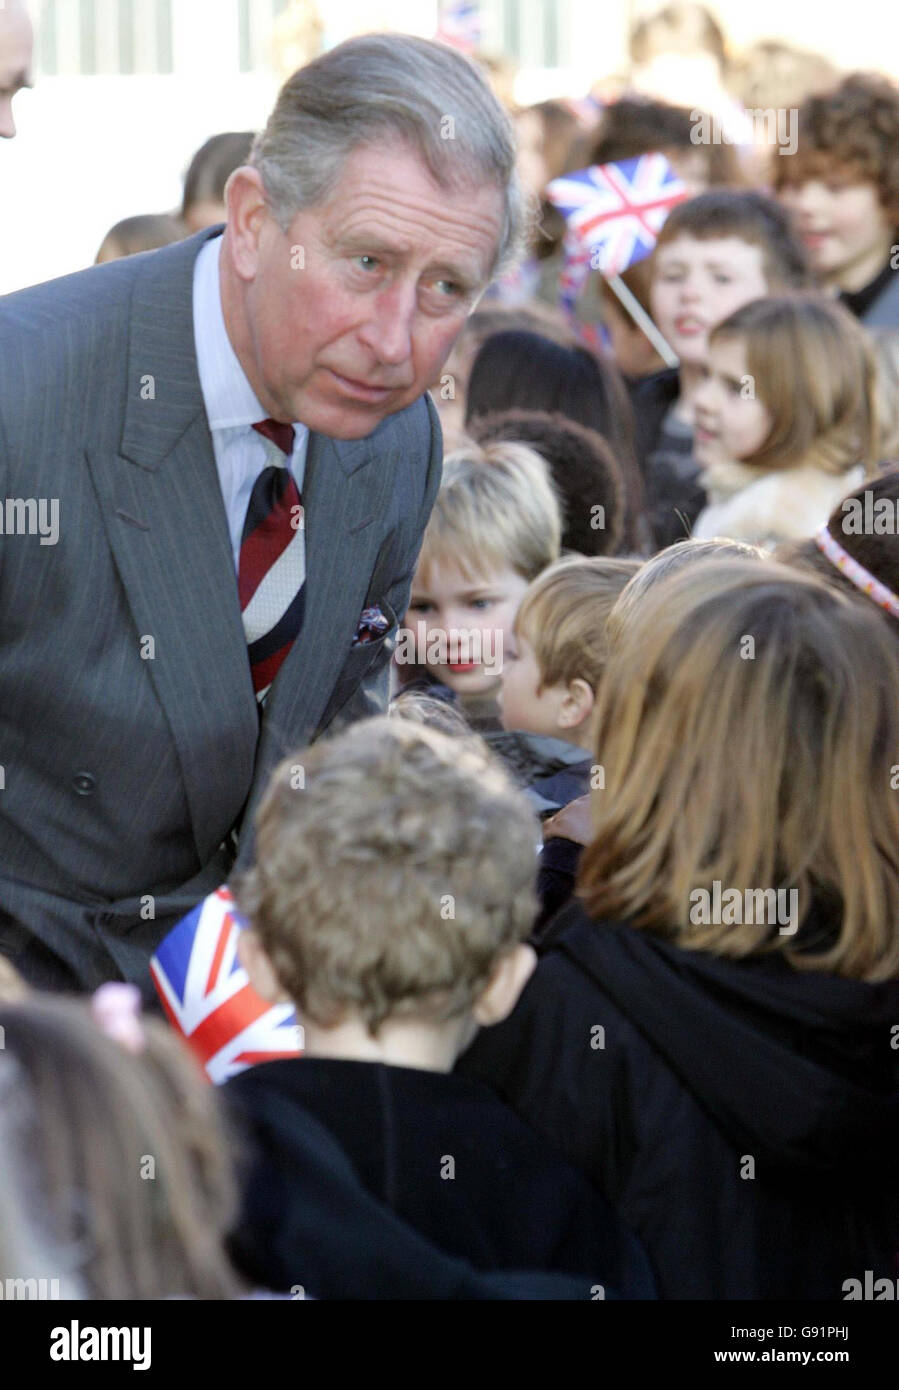 The Prince of Wales during a visit to Hotwells Primary School, Bristol, Monday December 12, 2005. The Prince today visited the pioneering Bristol primary school which produces its own organic meals. The school encourages children to grow their own fruit and vegetables in the school's garden . These fresh, home-made goodies are then used as ingredients for the youngsters' school dinners. See PA story ROYAL Charles. PRESS ASSOCIATION Photo. Photo credit should read: Tim Ockenden/WPA Rota/PA. Stock Photo